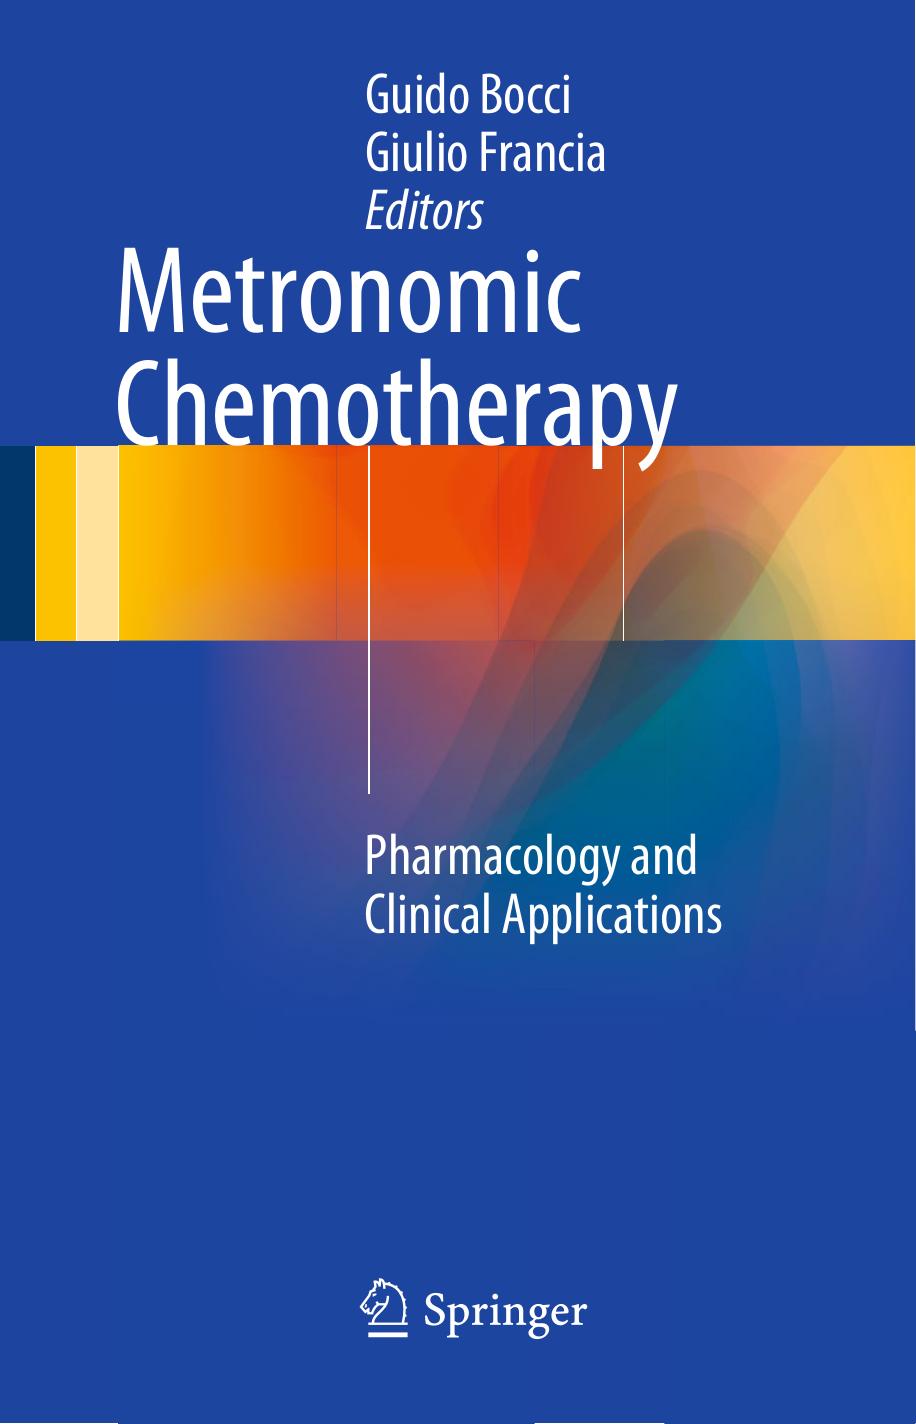 Metronomic Chemotherapy  Pharmacology and Clinical Applications (2015)